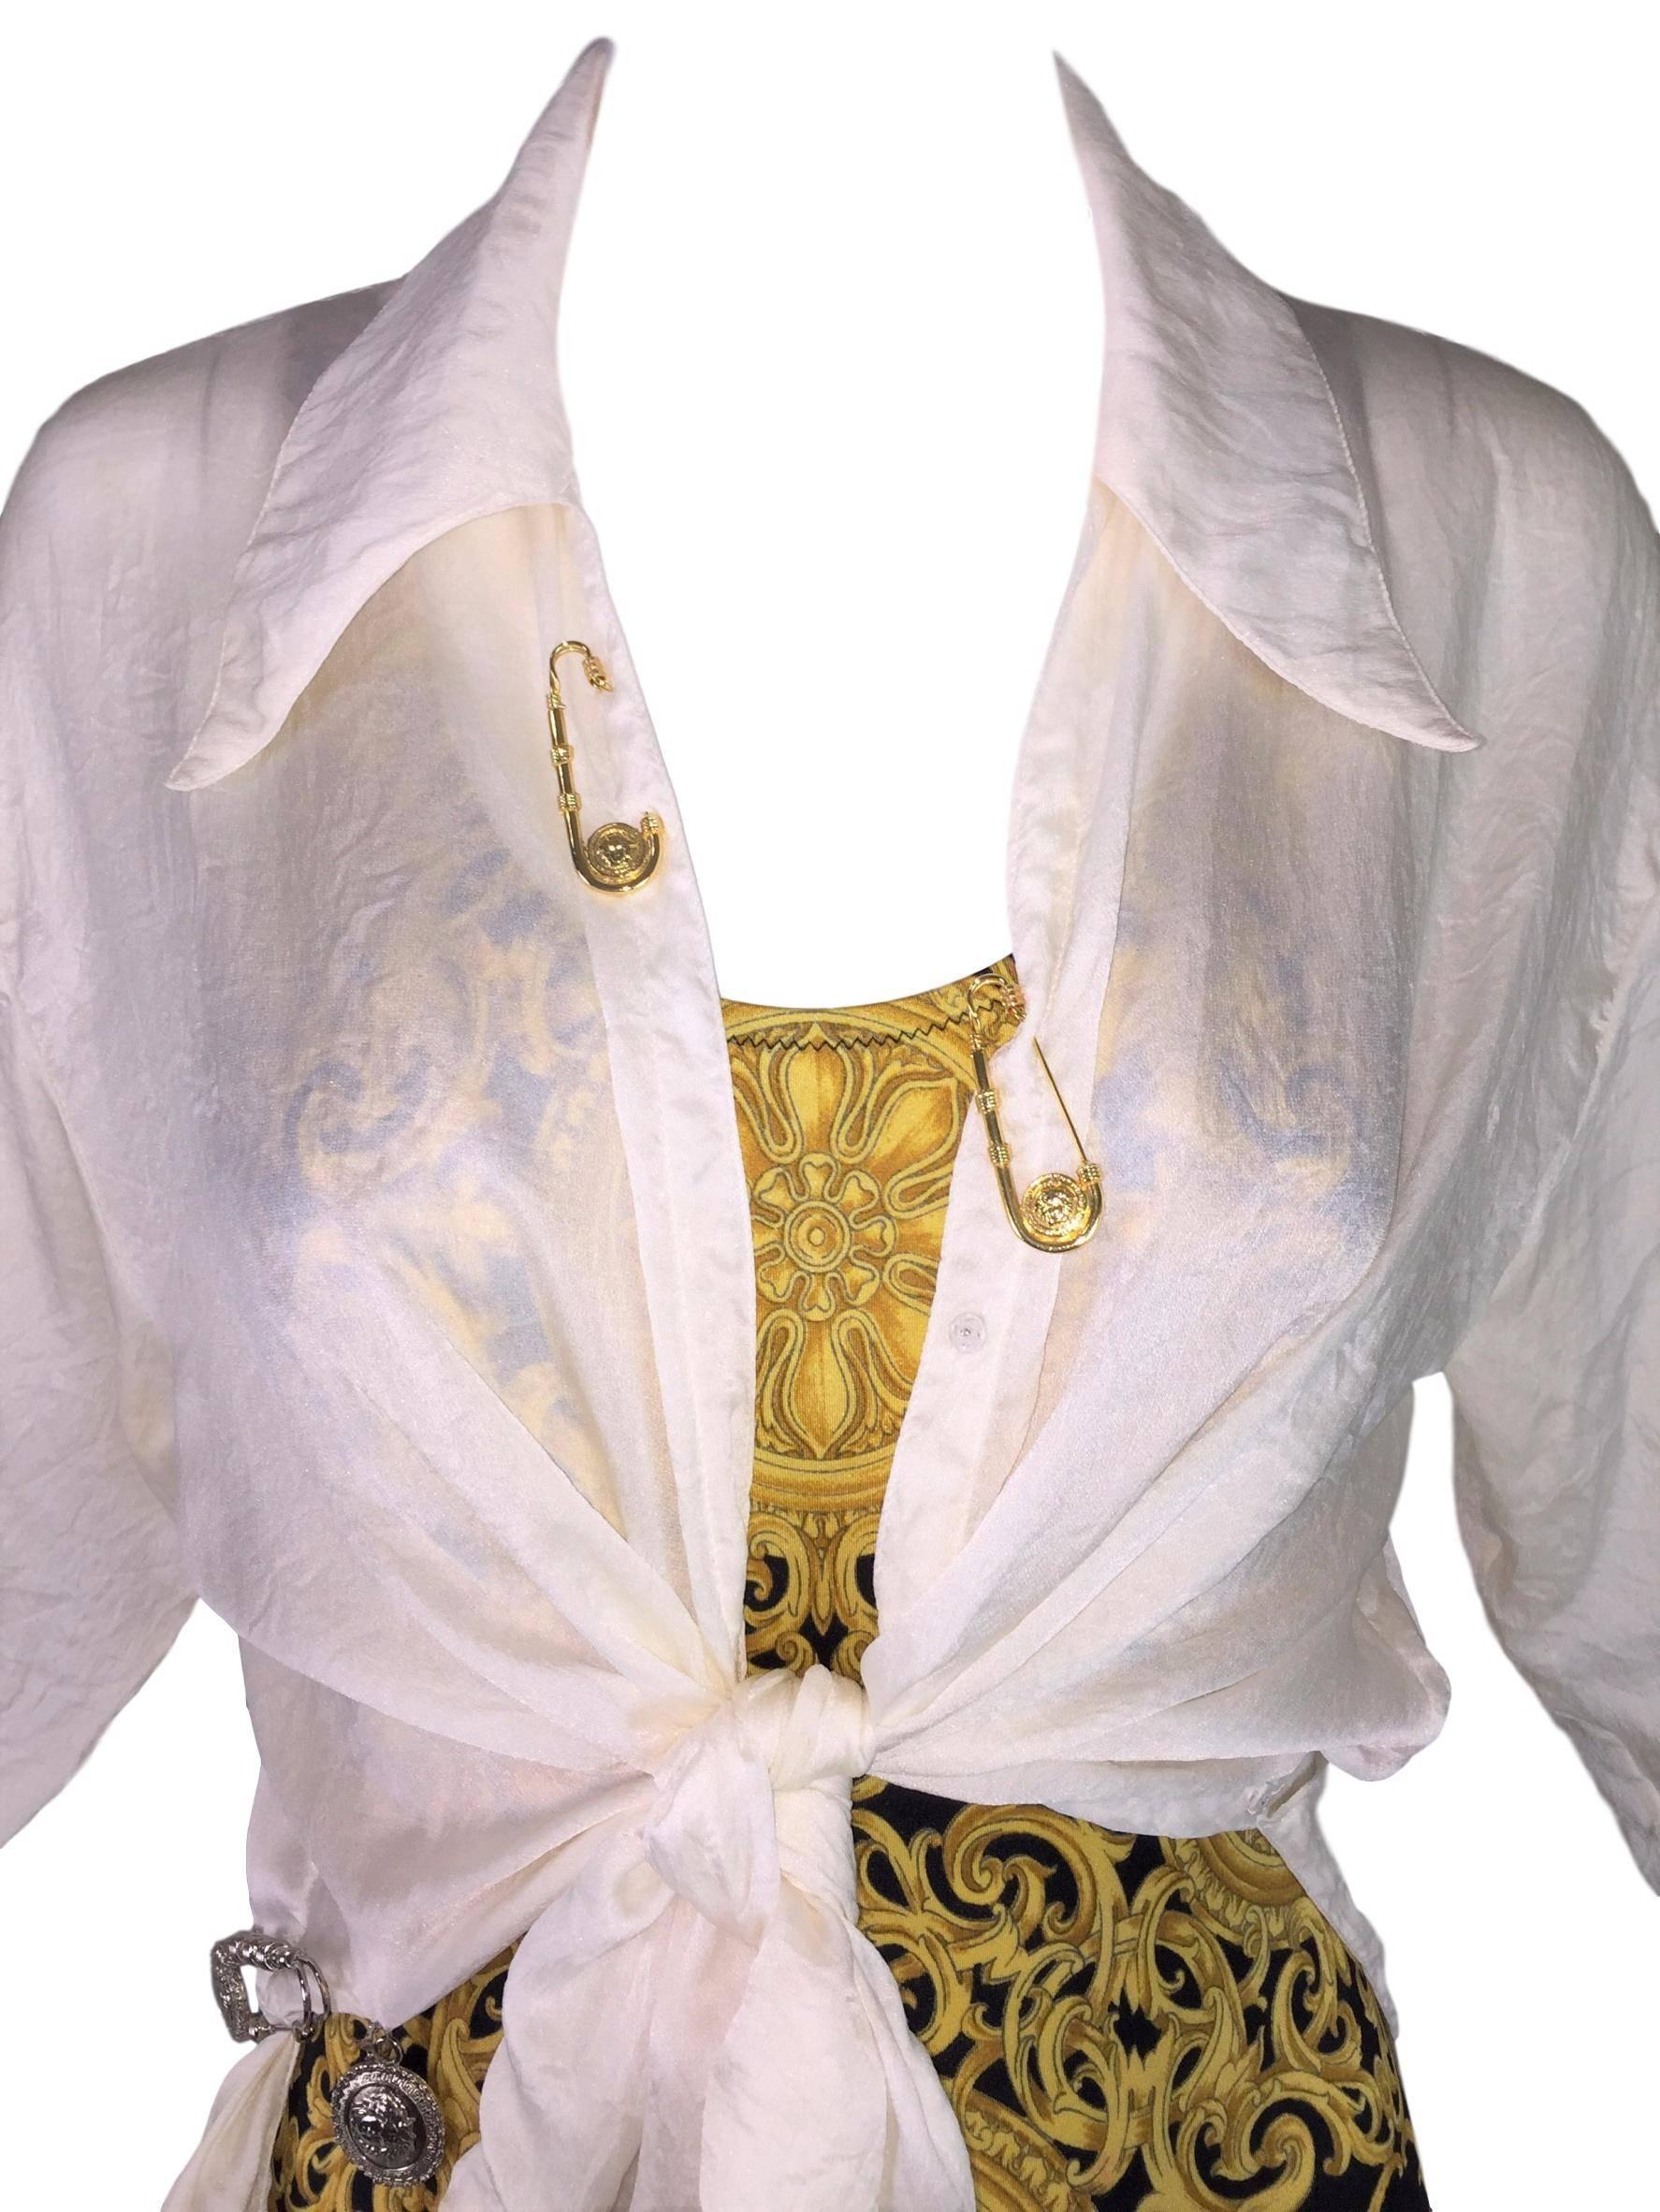 S/S 1994 Gianni Versace Sheer Ivory Silk Tie Front Safety Pin Blouse Top In Good Condition In Yukon, OK